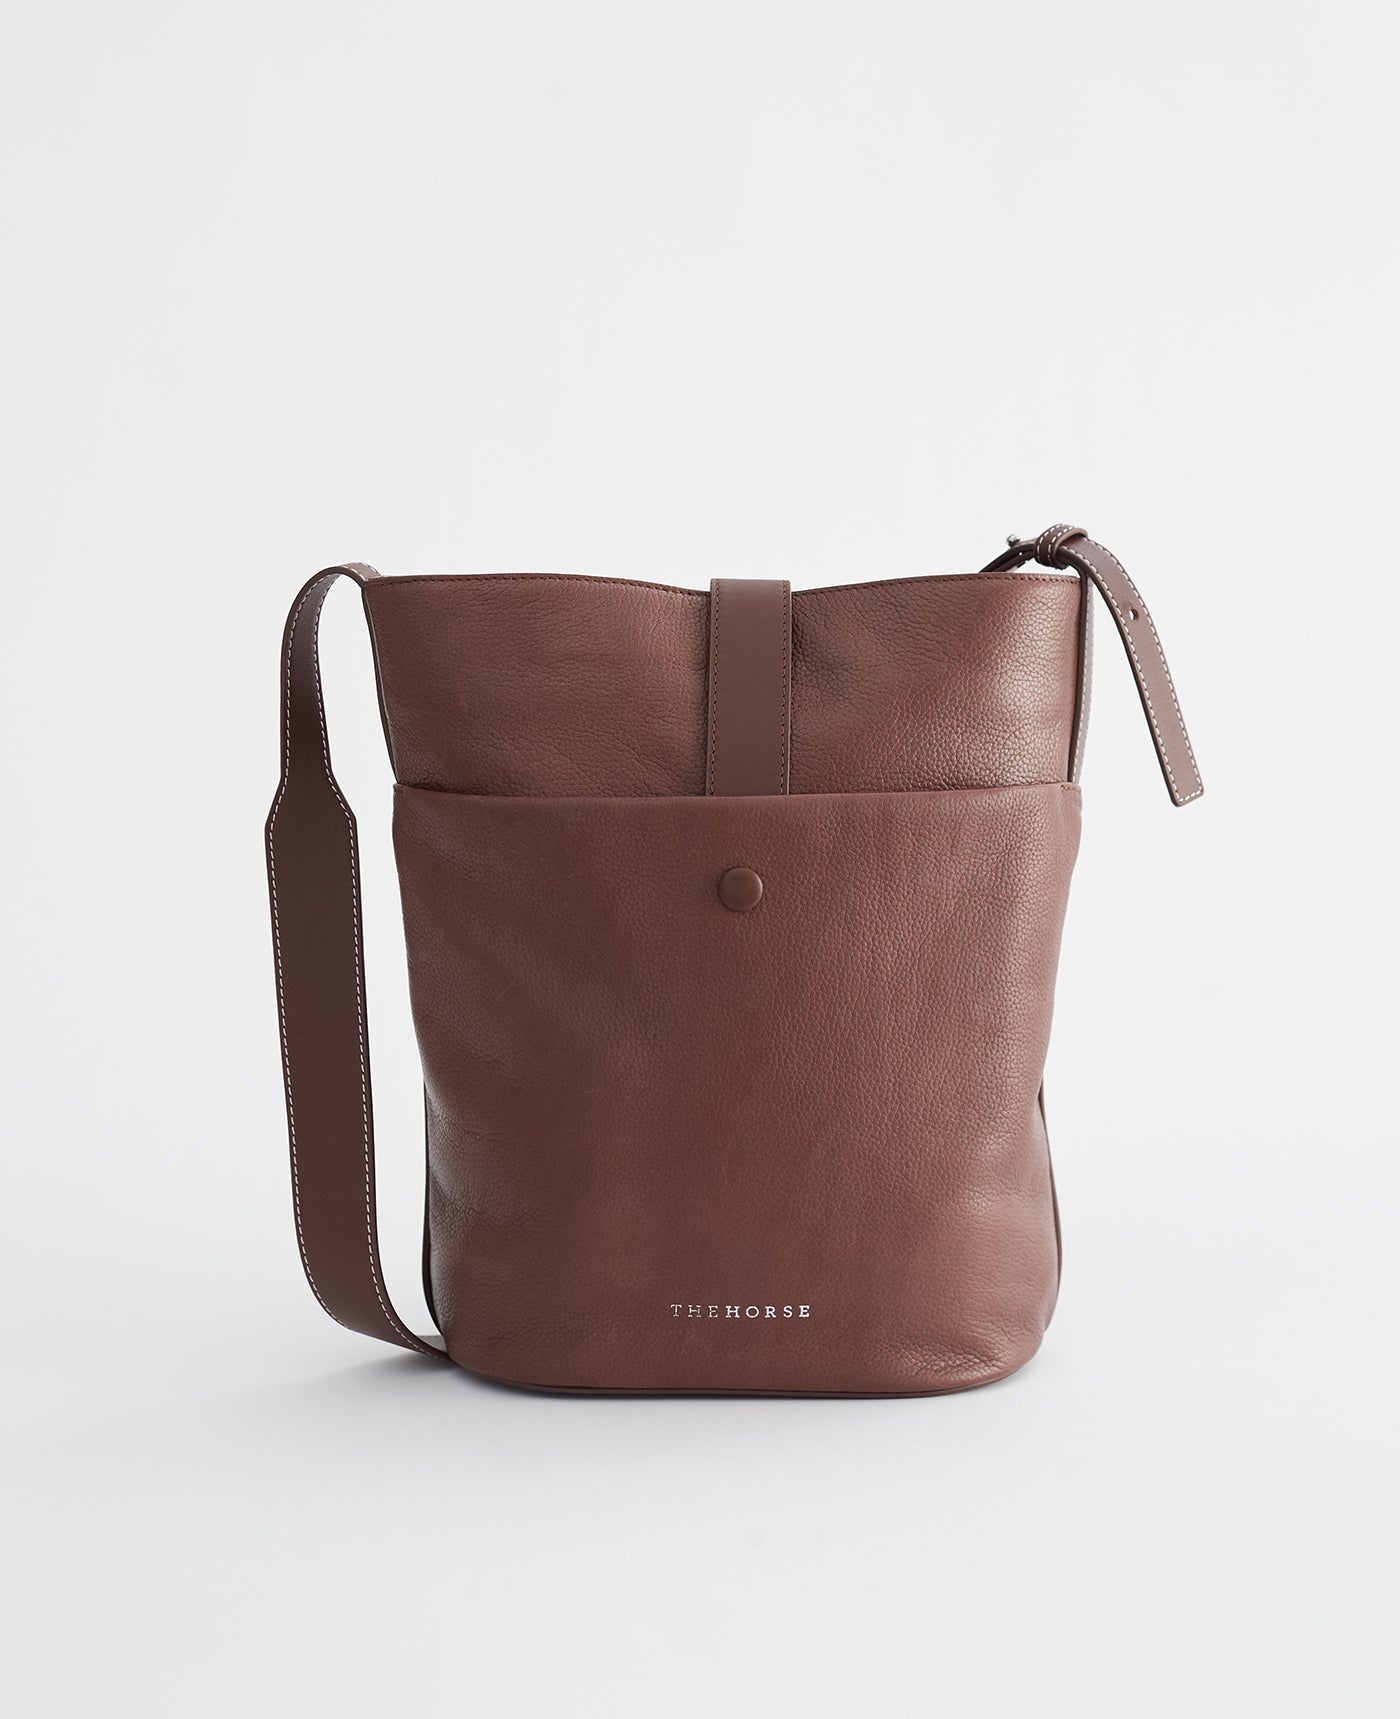 The Large Luella Bucket Bag in Coffee Leather by The Horse®